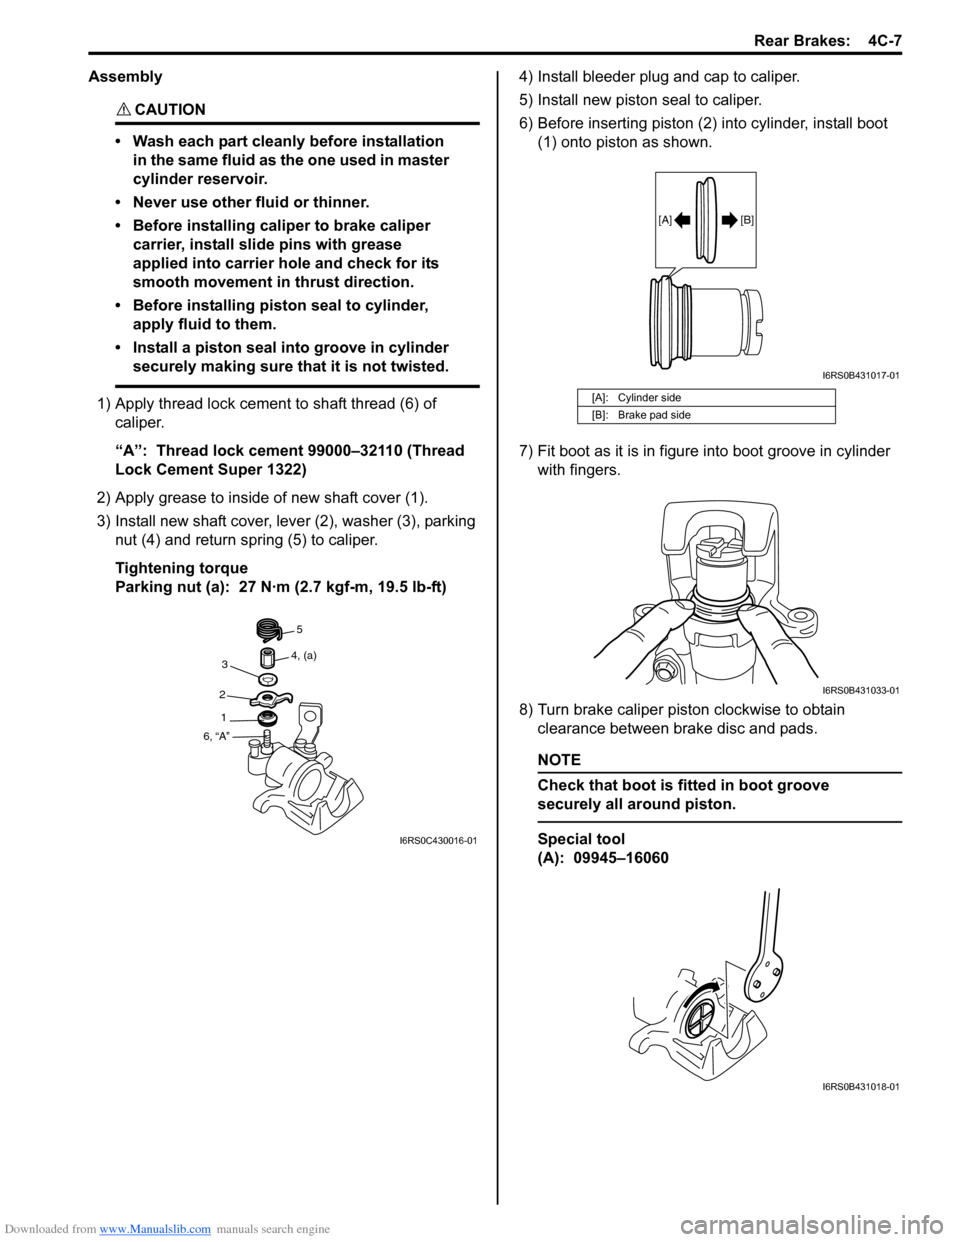 SUZUKI SWIFT 2008 2.G Service Owners Manual Downloaded from www.Manualslib.com manuals search engine Rear Brakes:  4C-7
Assembly
CAUTION! 
• Wash each part cleanly before installation in the same fluid as the one used in master 
cylinder rese